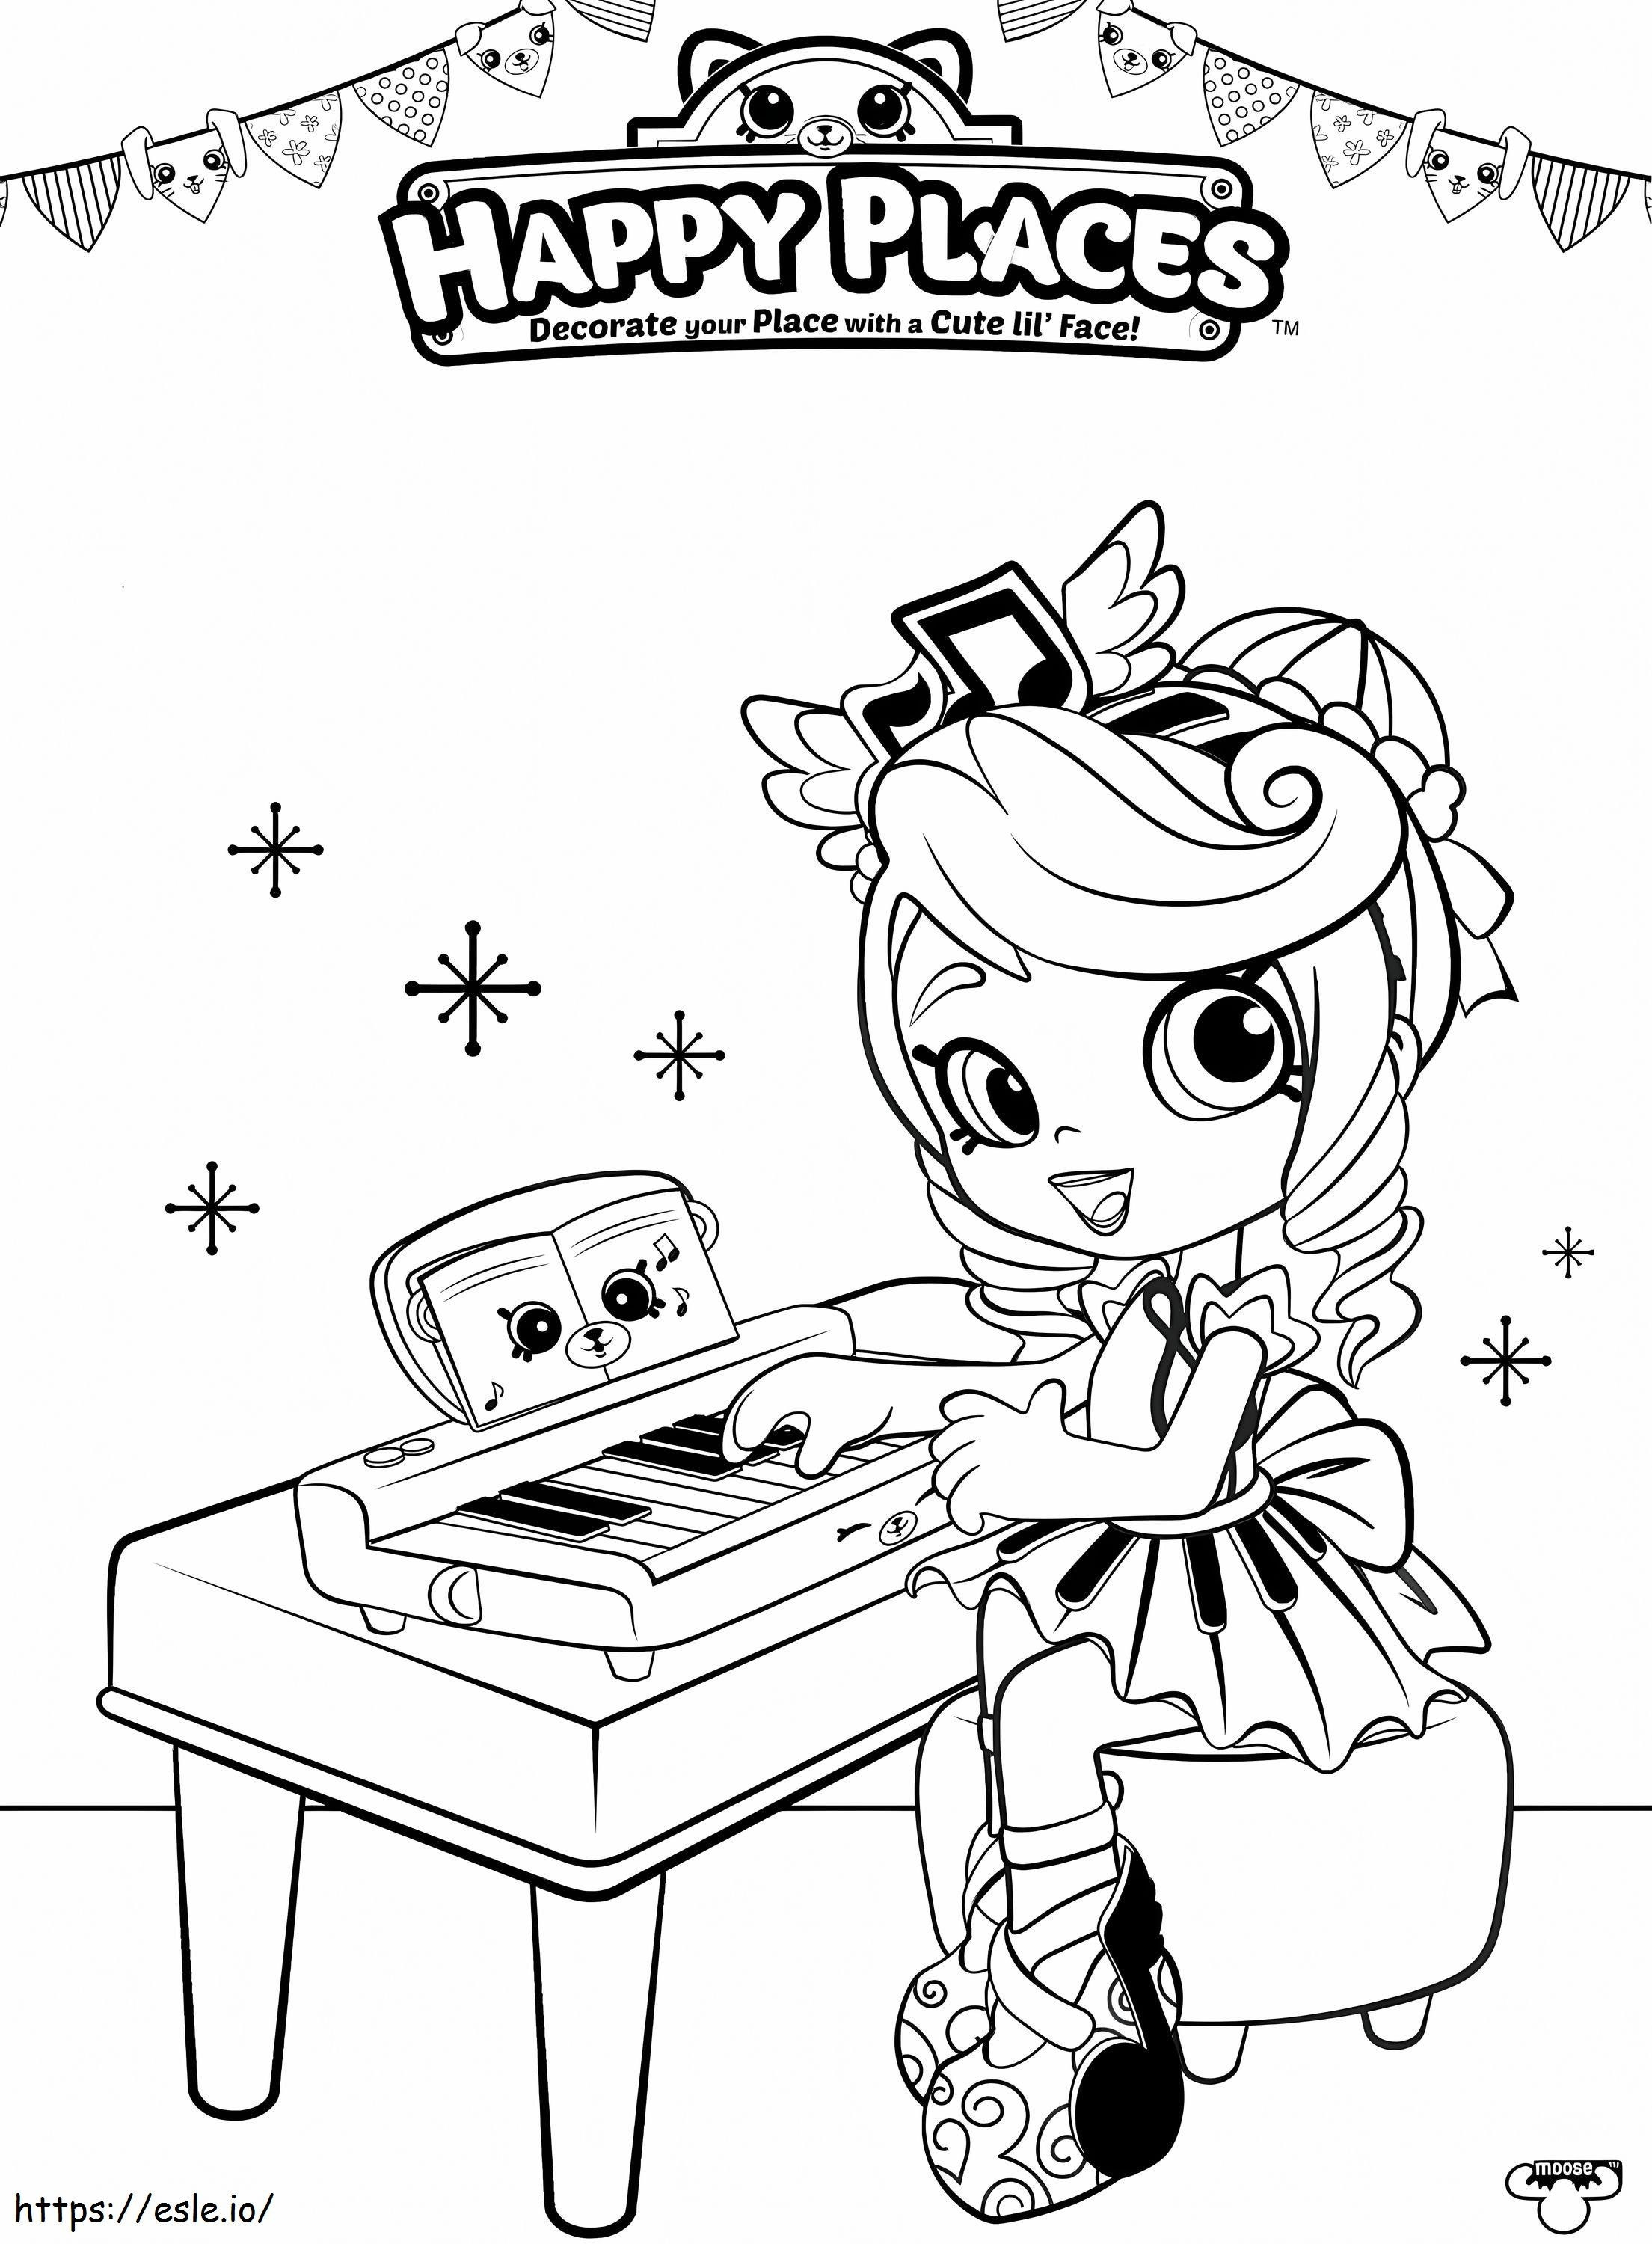 Peppa Mint Shopkins Playing Piano coloring page